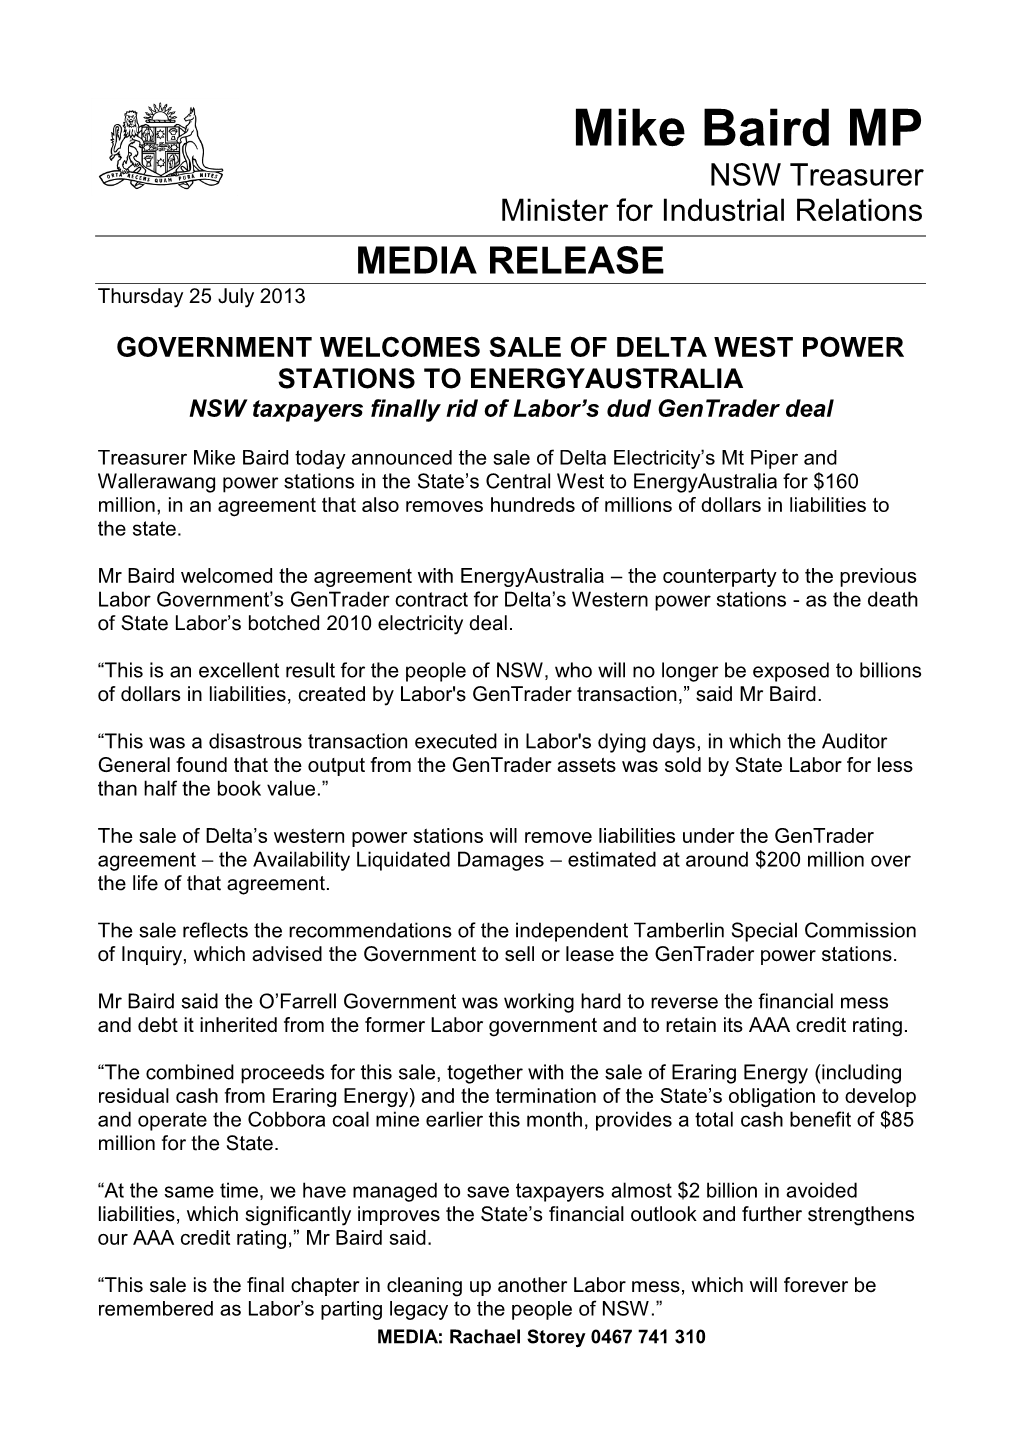 GOVERNMENT WELCOMES SALE of DELTA WEST POWER STATIONS to ENERGYAUSTRALIA NSW Taxpayers Finally Rid of Labor’S Dud Gentrader Deal